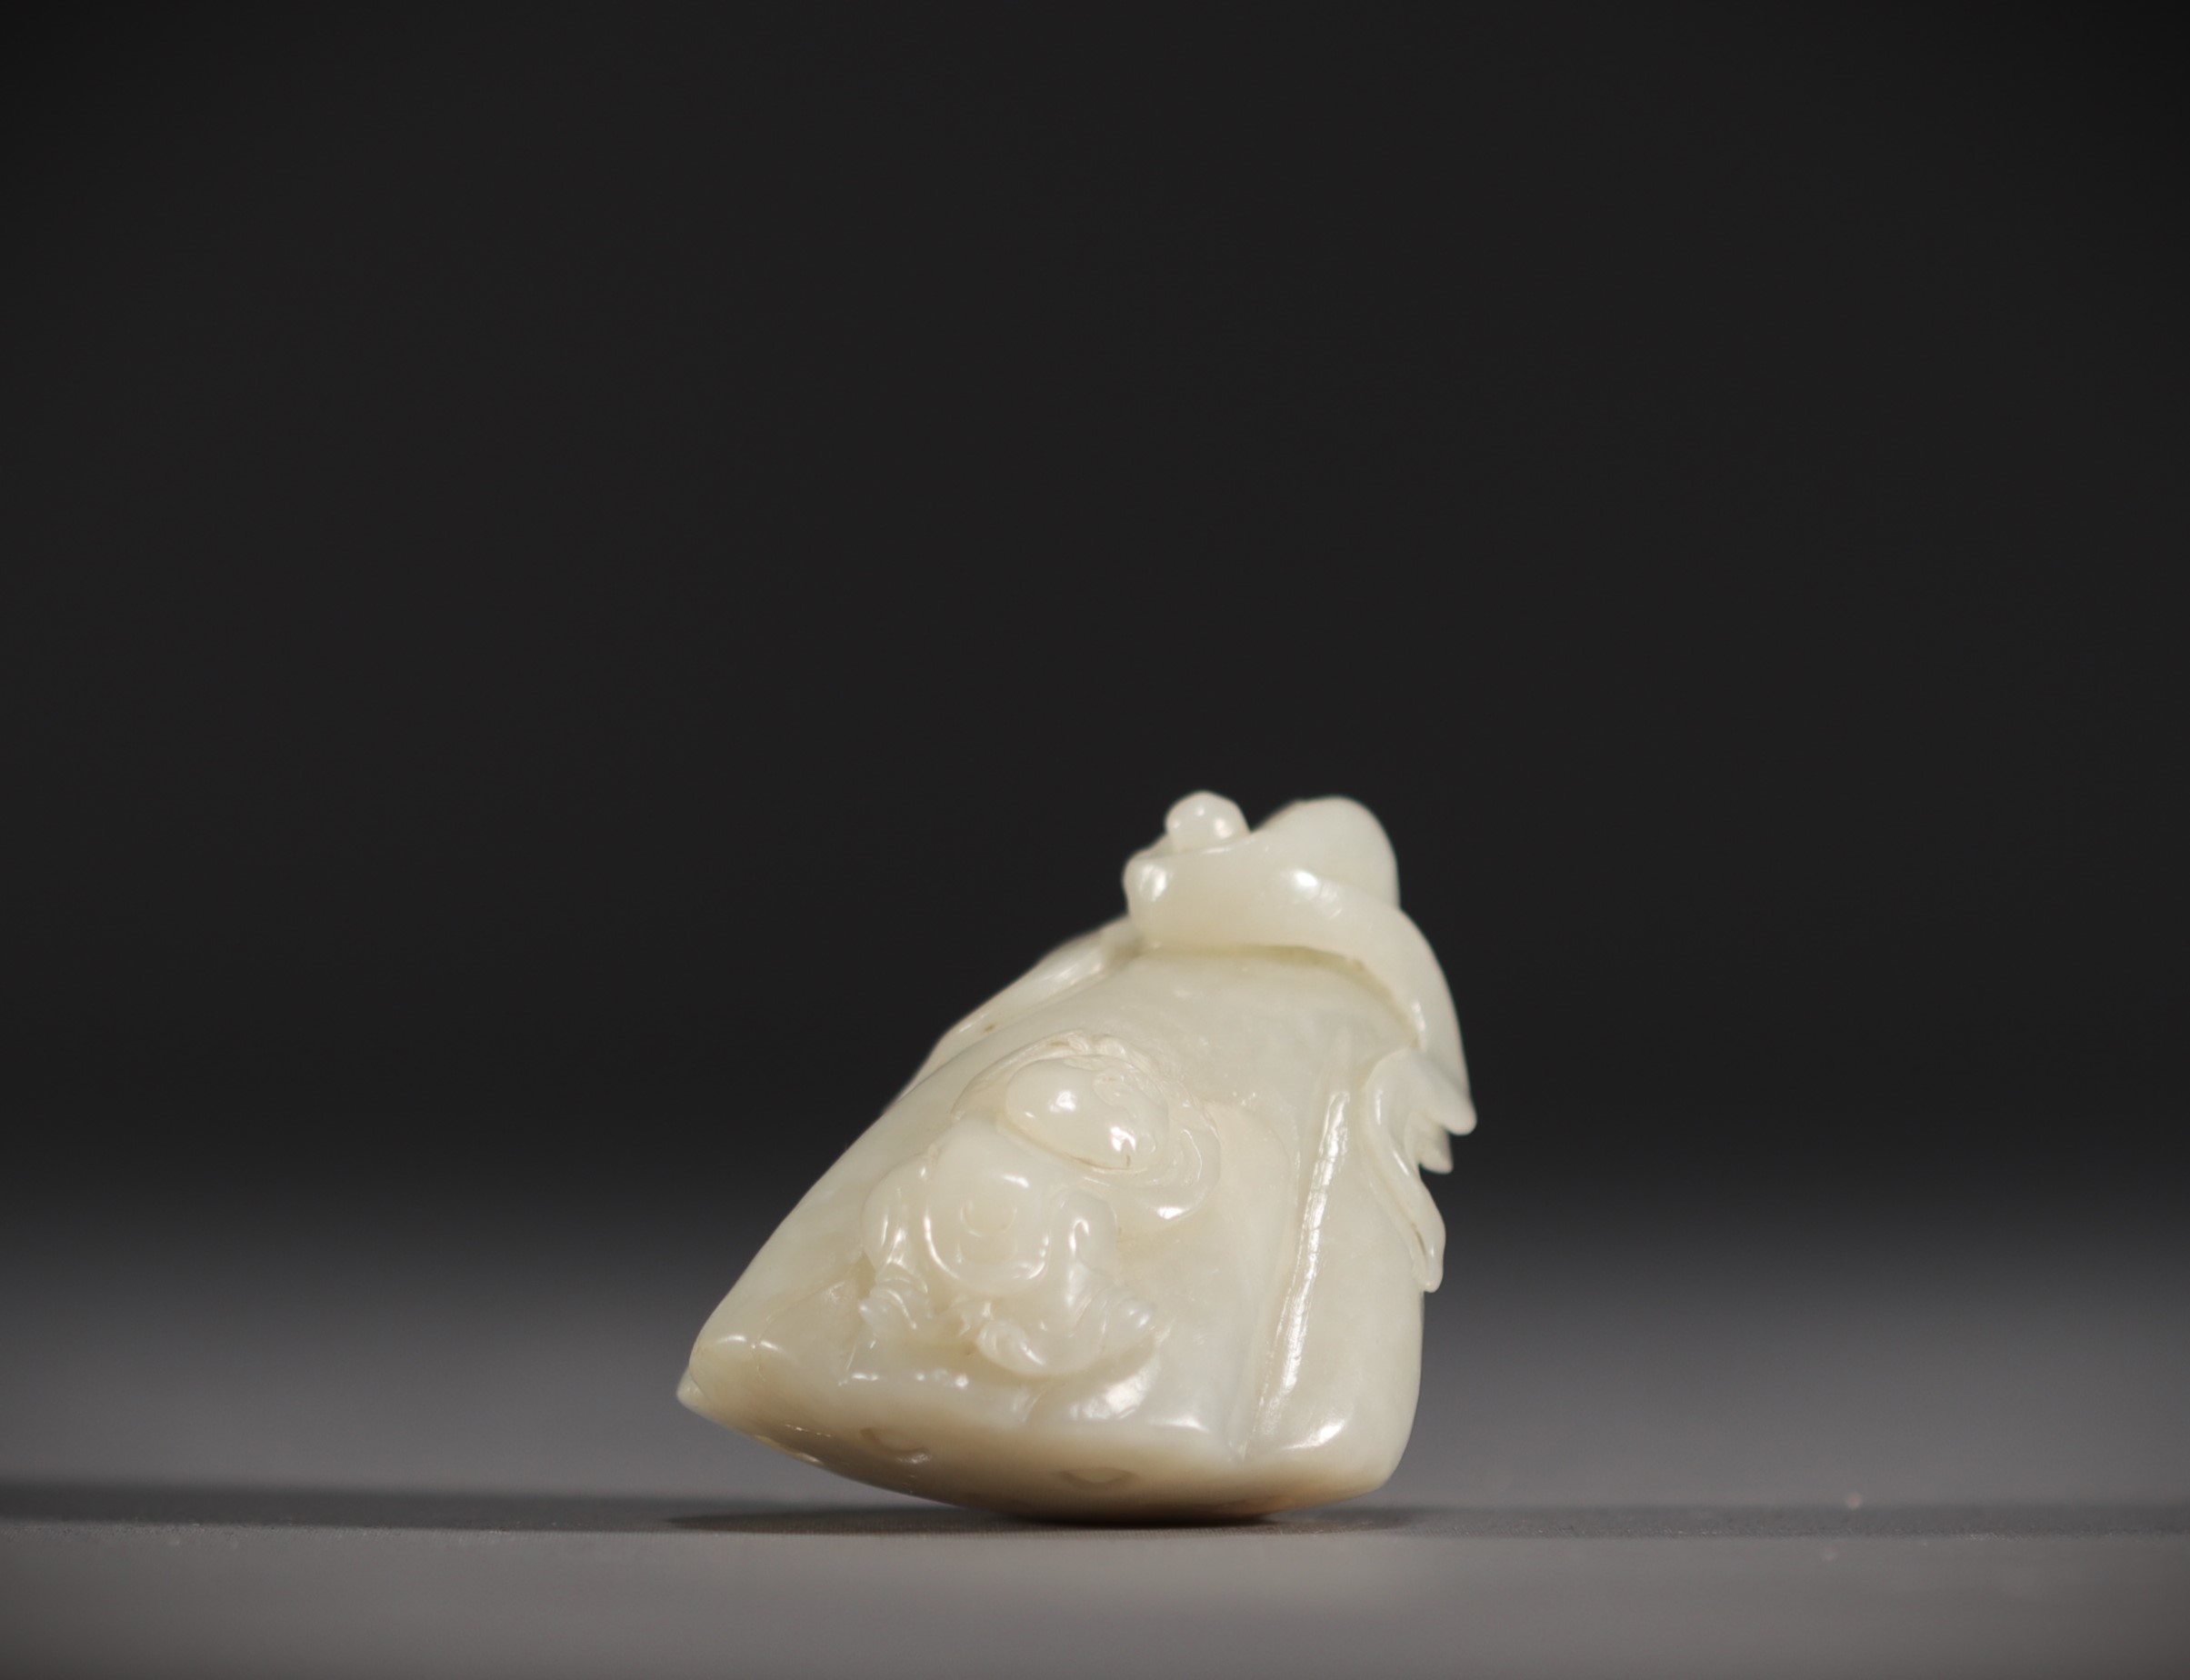 China - White jade pendant in the shape of a fruit surmounted by a young child. - Image 2 of 6